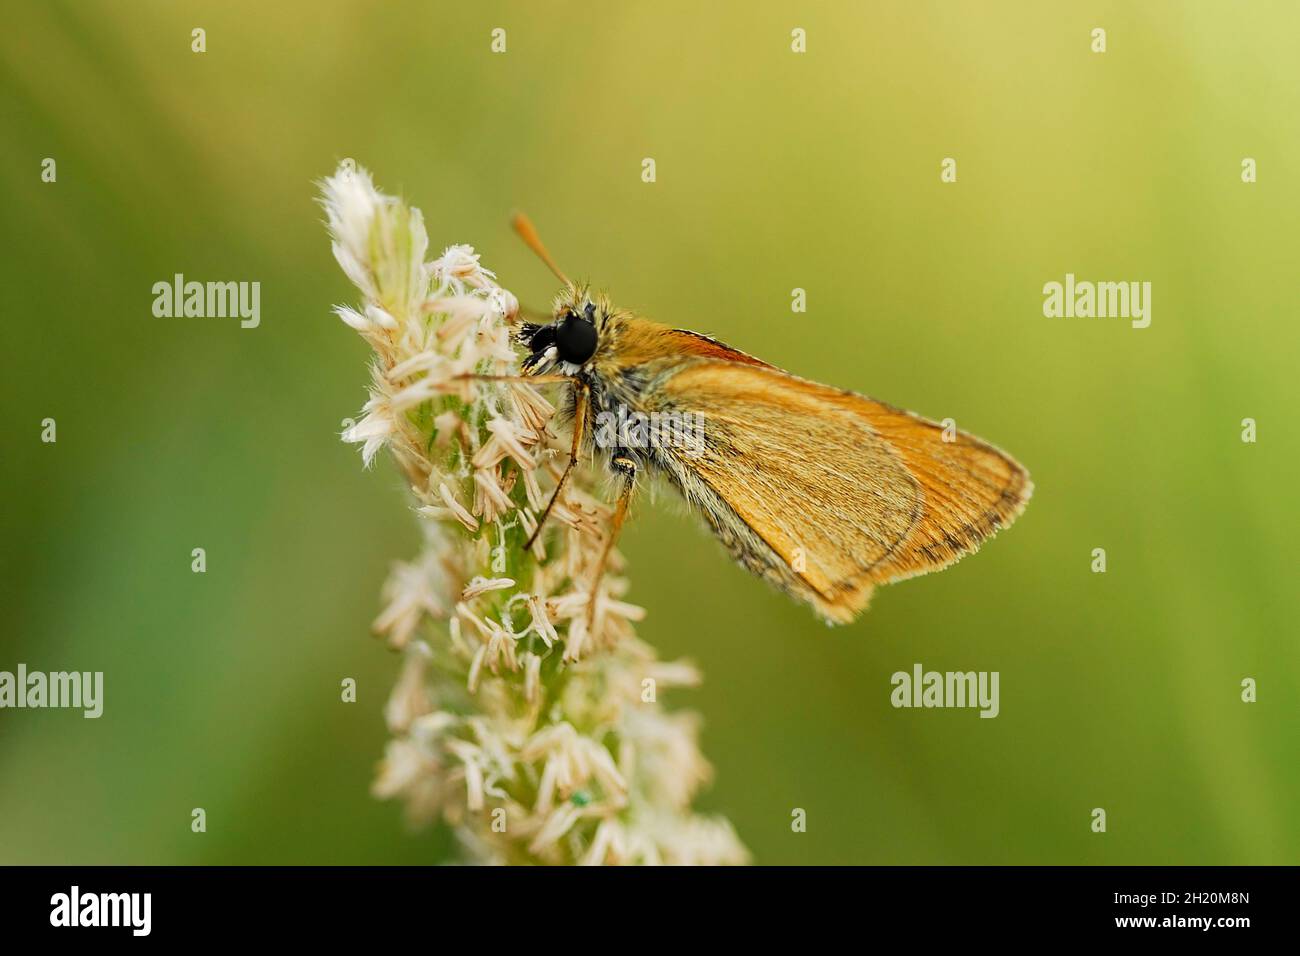 Day butterfly perched on flower, Thymelicus sylvestris Stock Photo